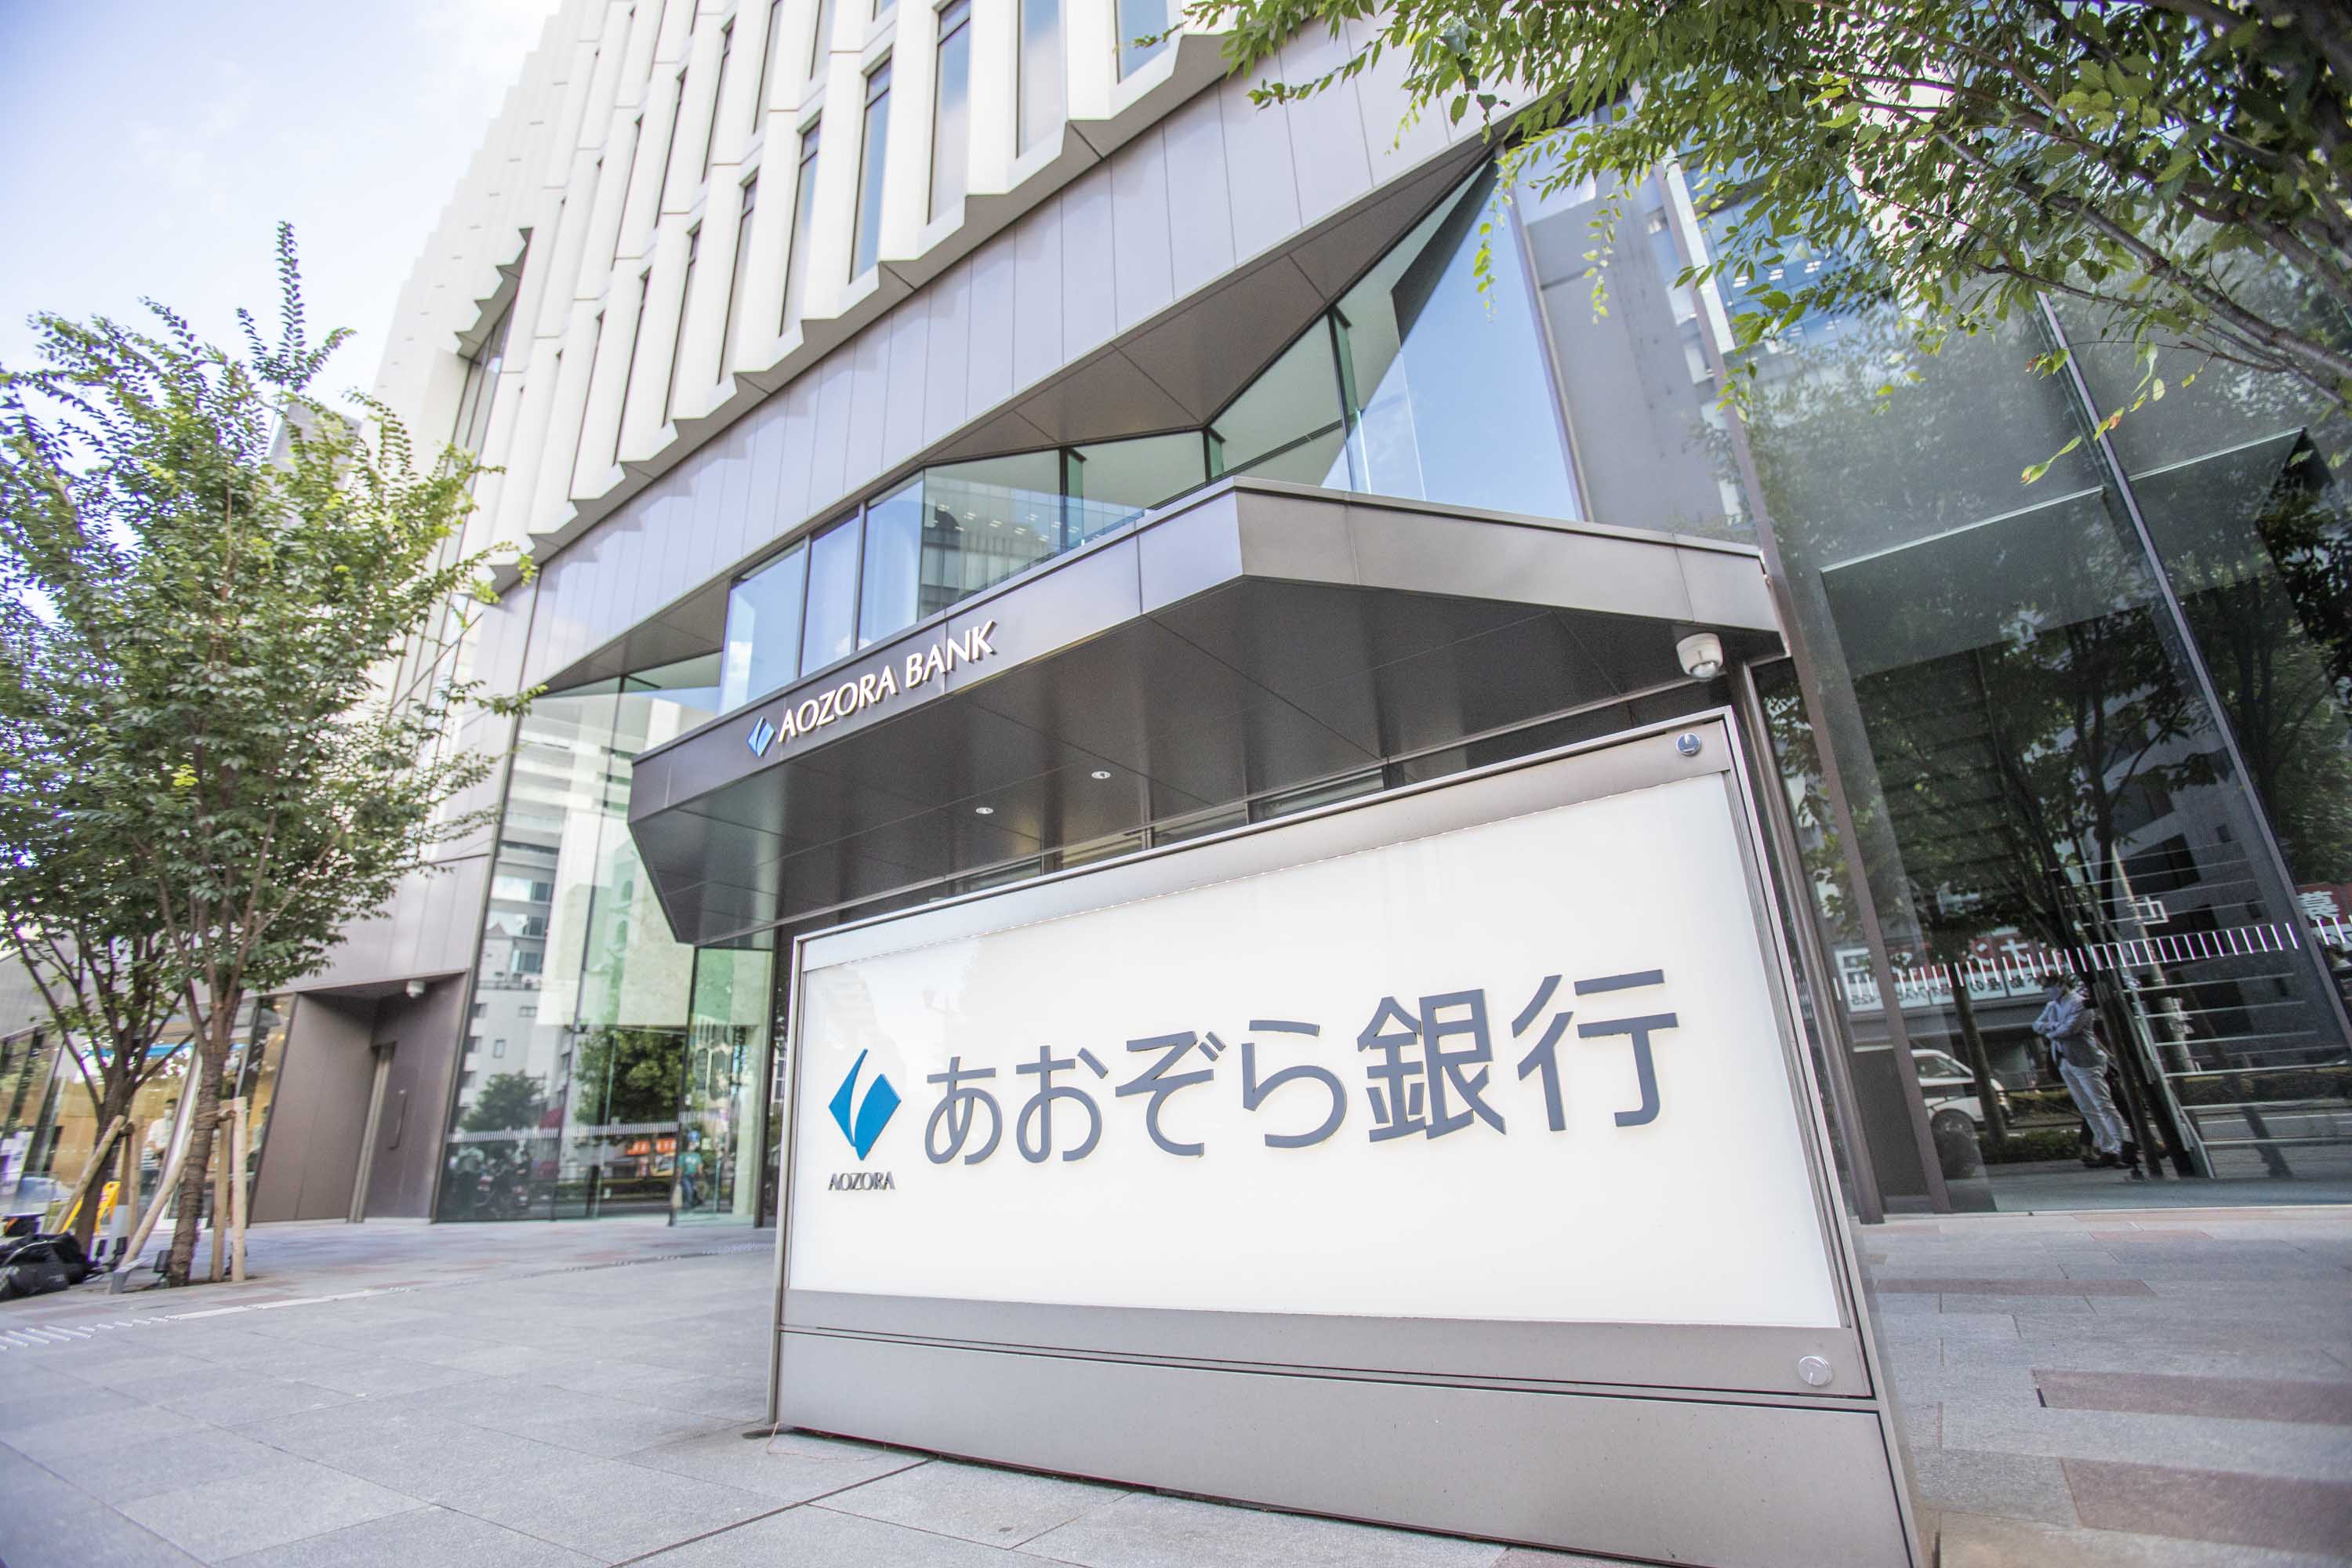 The exterior of the Aozora Bank office on a tree-lined street. The name Aozora Bank is visible above the glass office doors.